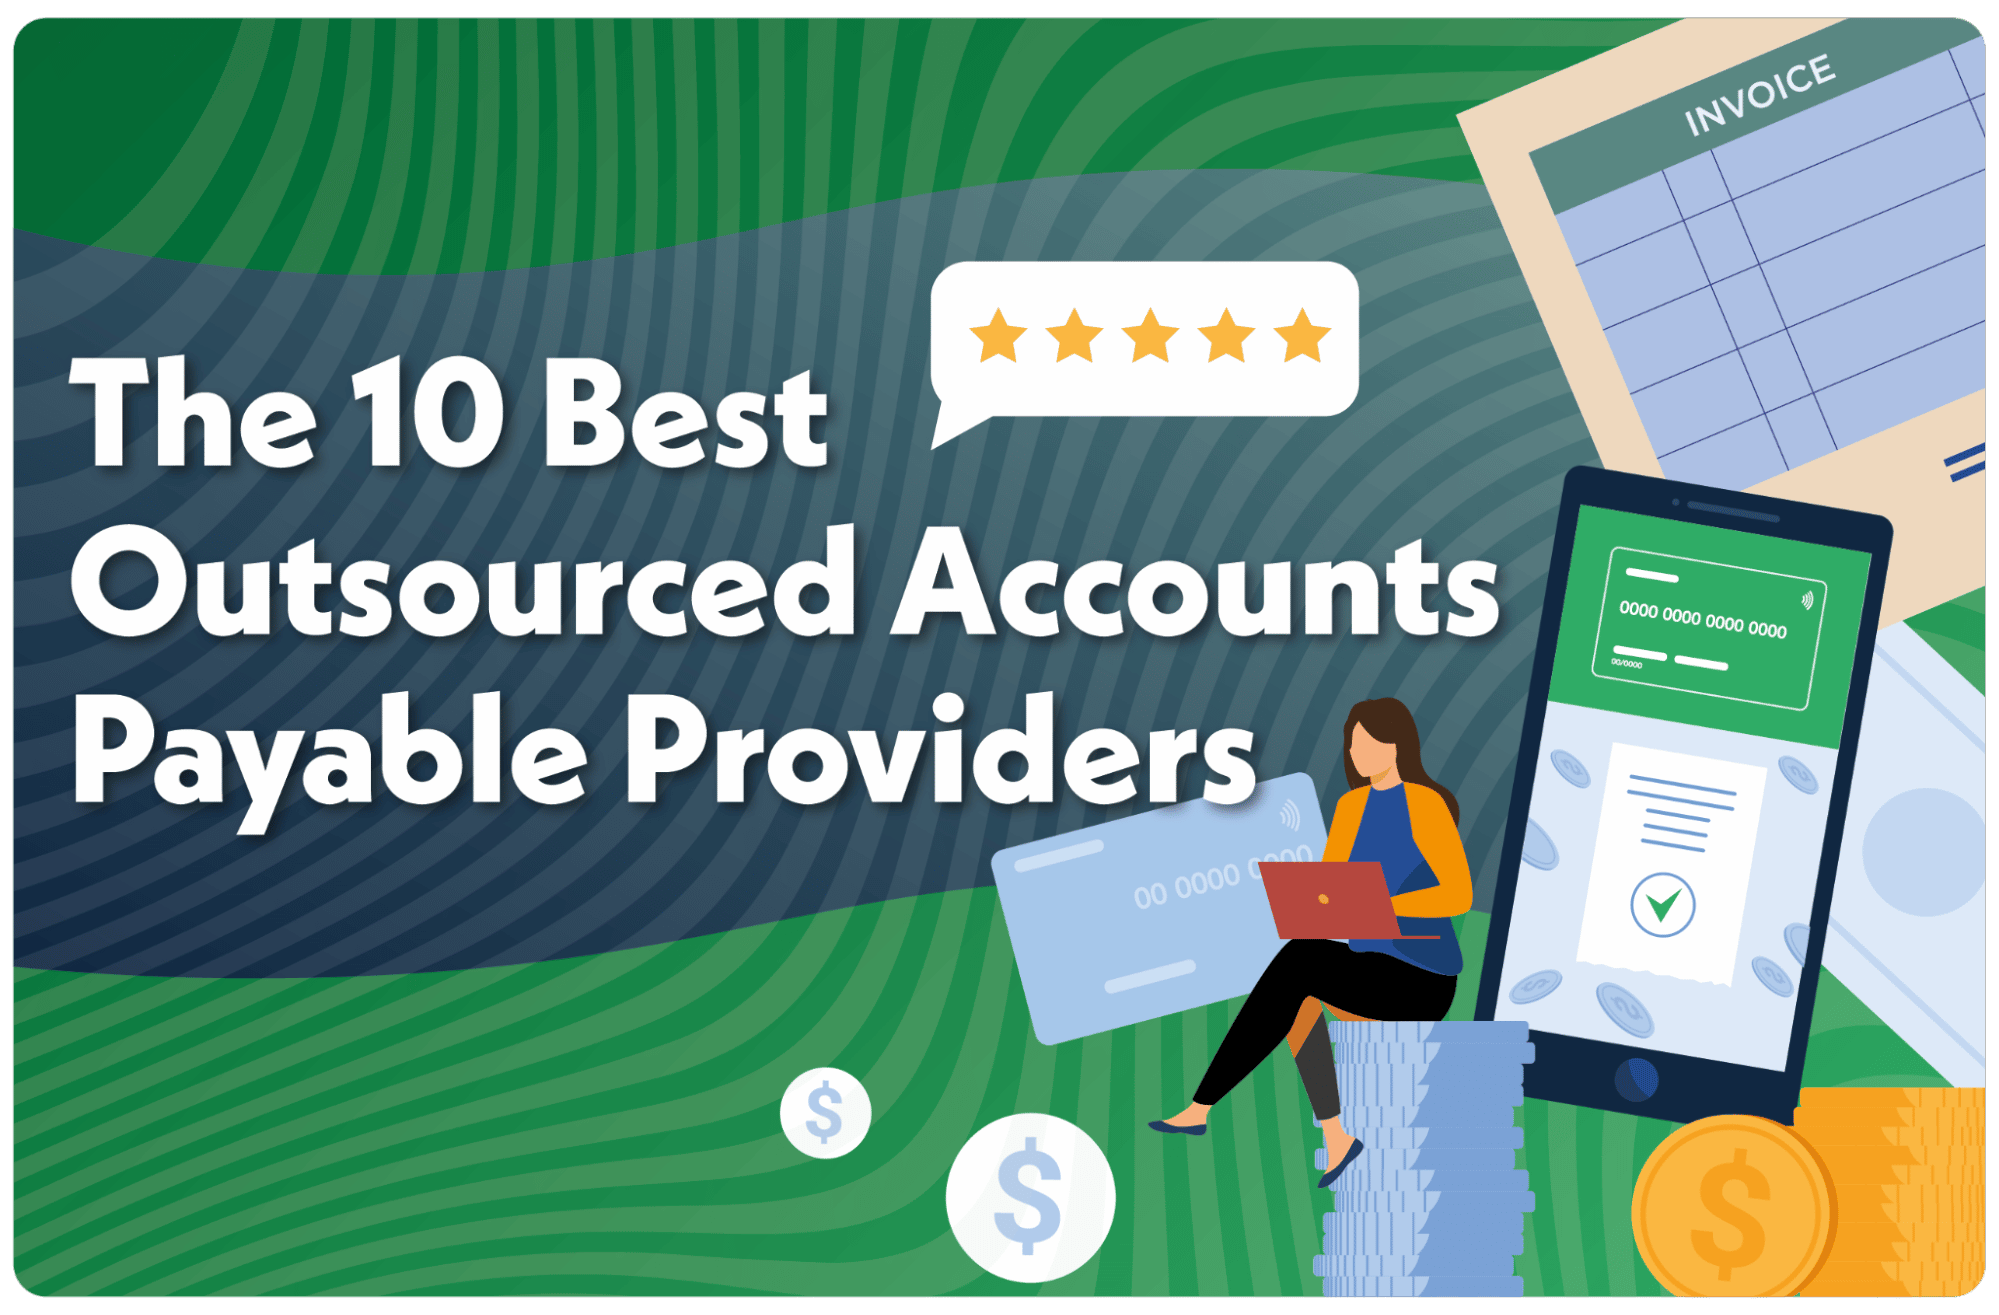 Outsourced Accounts Payable Providers